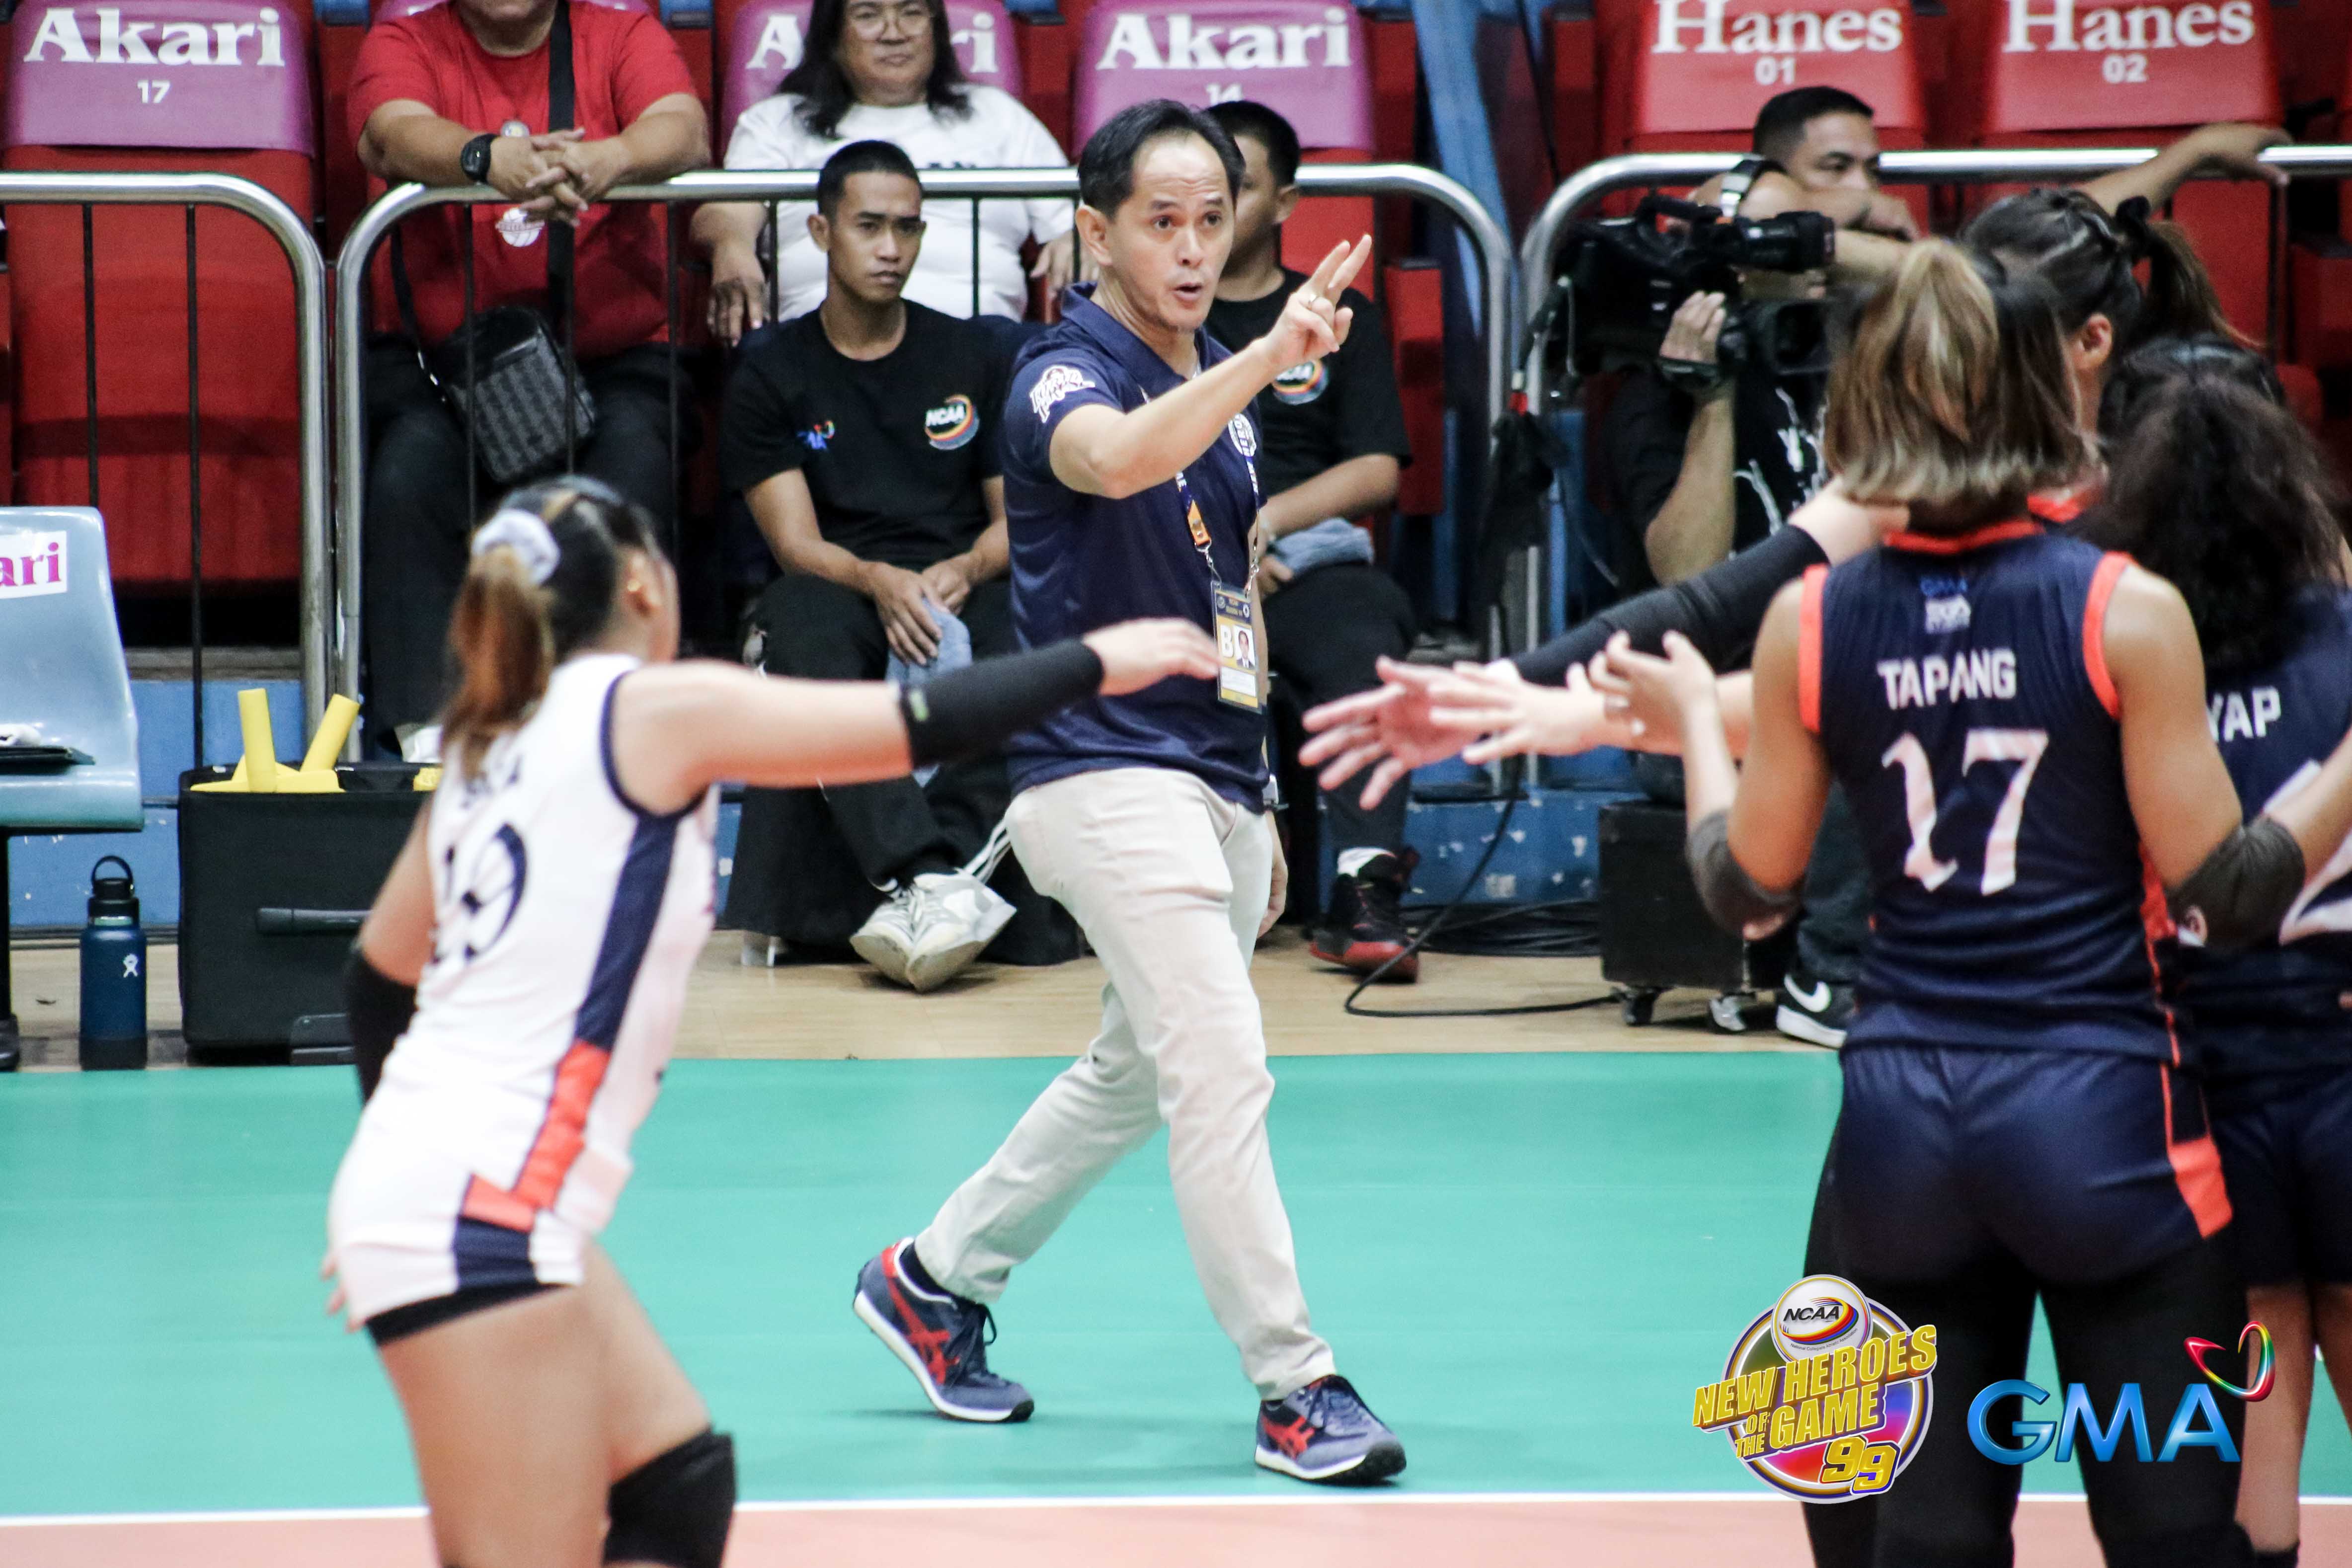 Almadro, Letran ‘on track’ in bringing back glory days